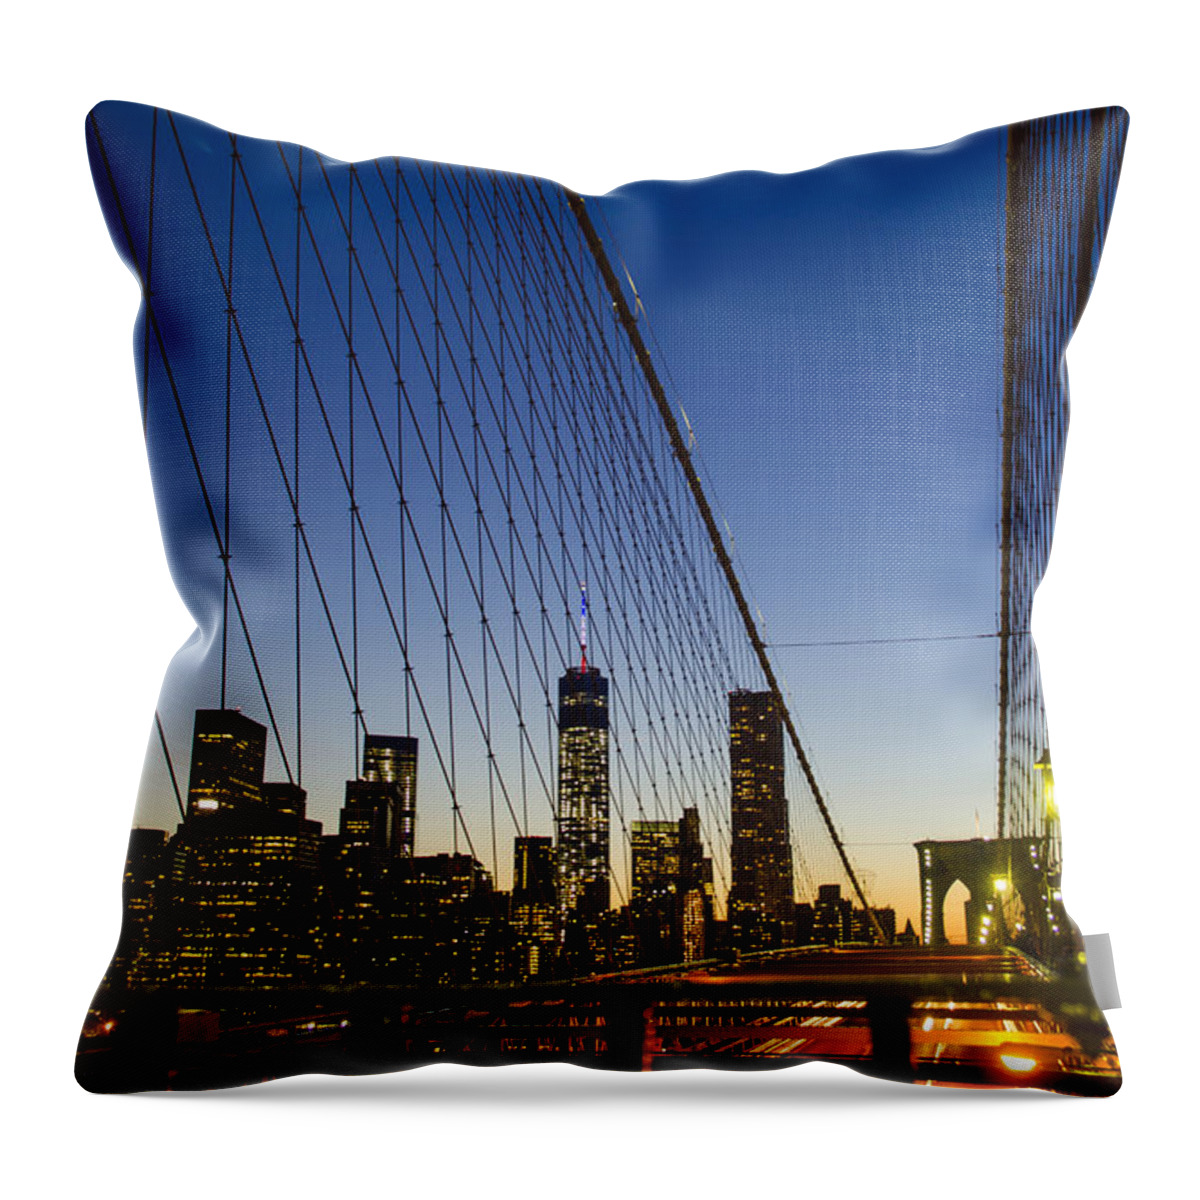 Wtc1 Throw Pillow featuring the photograph WTC1 from Brooklyn Bridge by GeeLeesa Productions